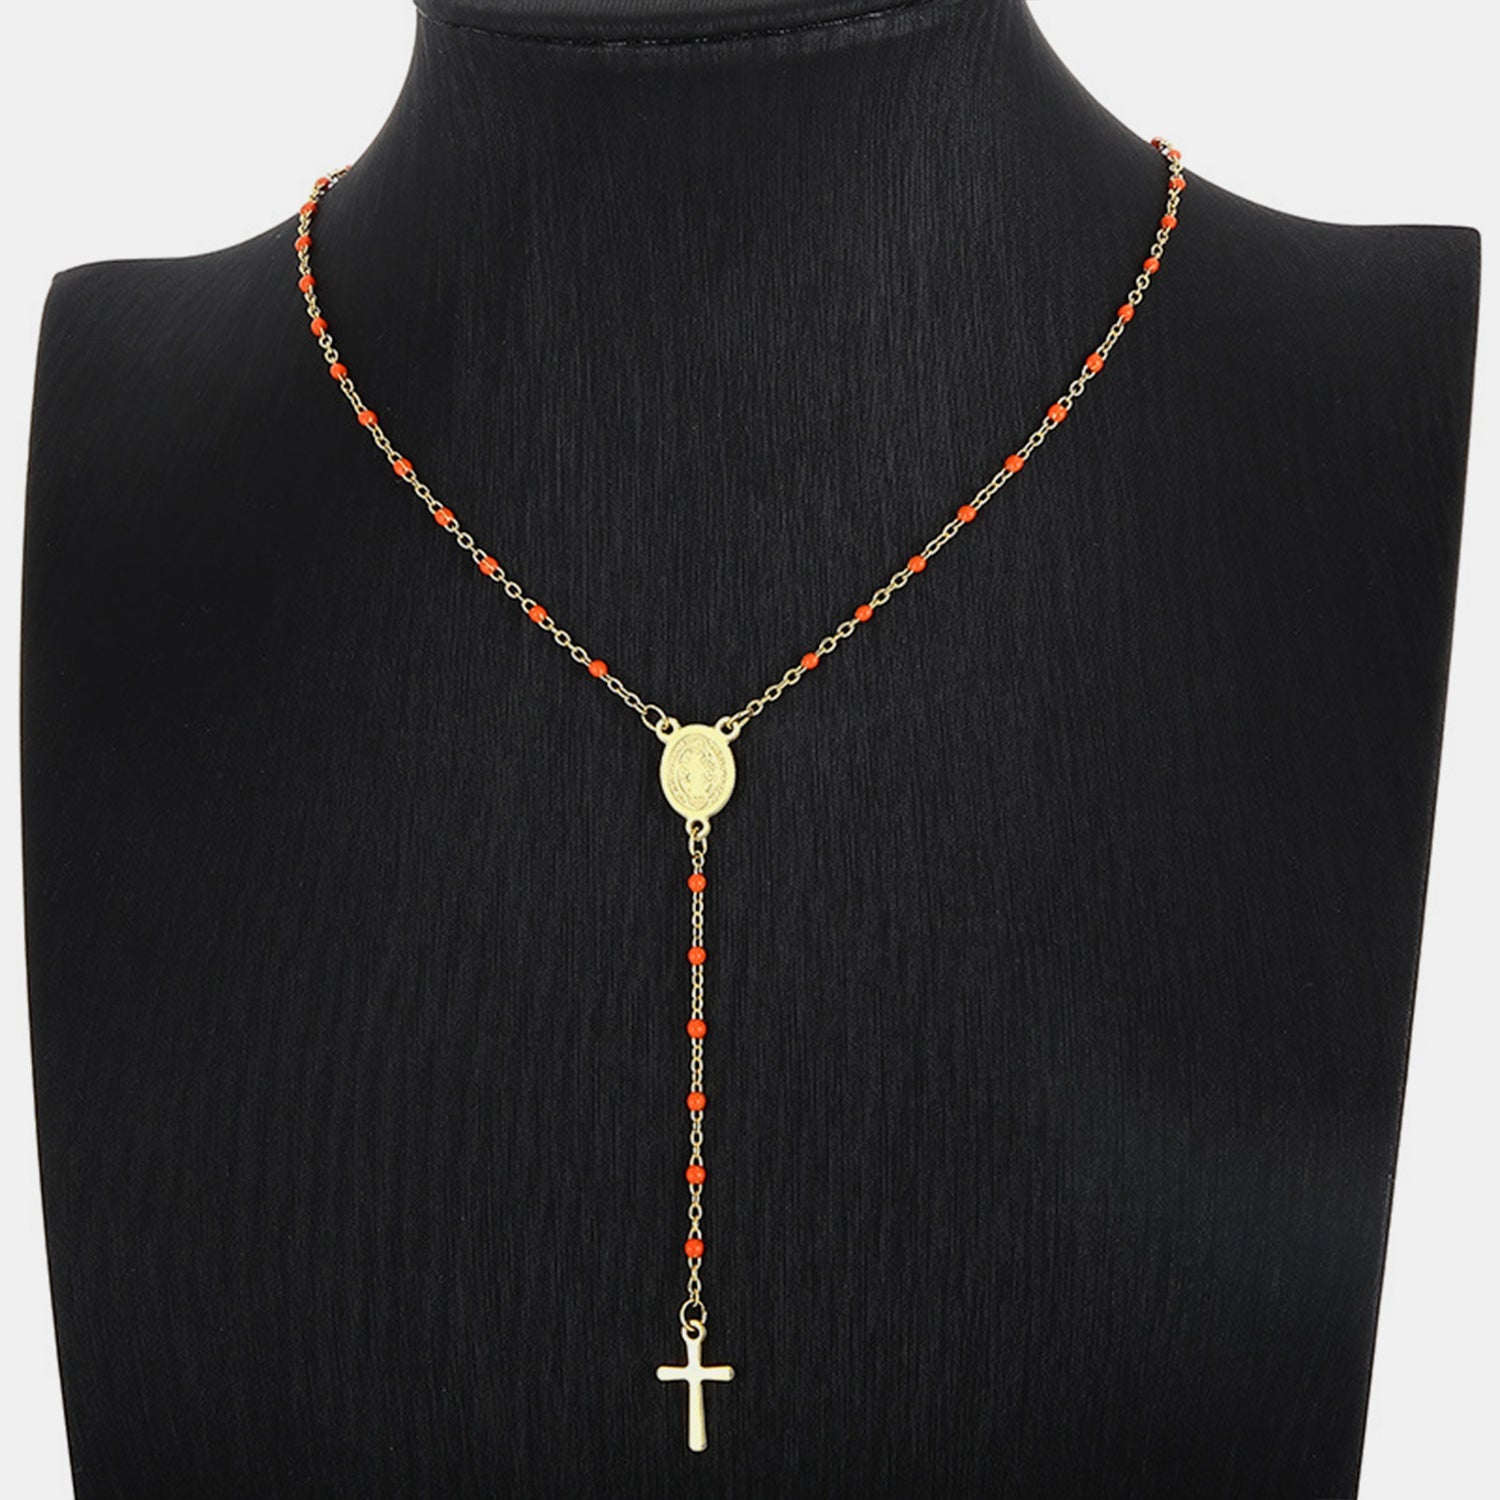 Stainless Steel Beaded Cross Necklace - OMG! Rose